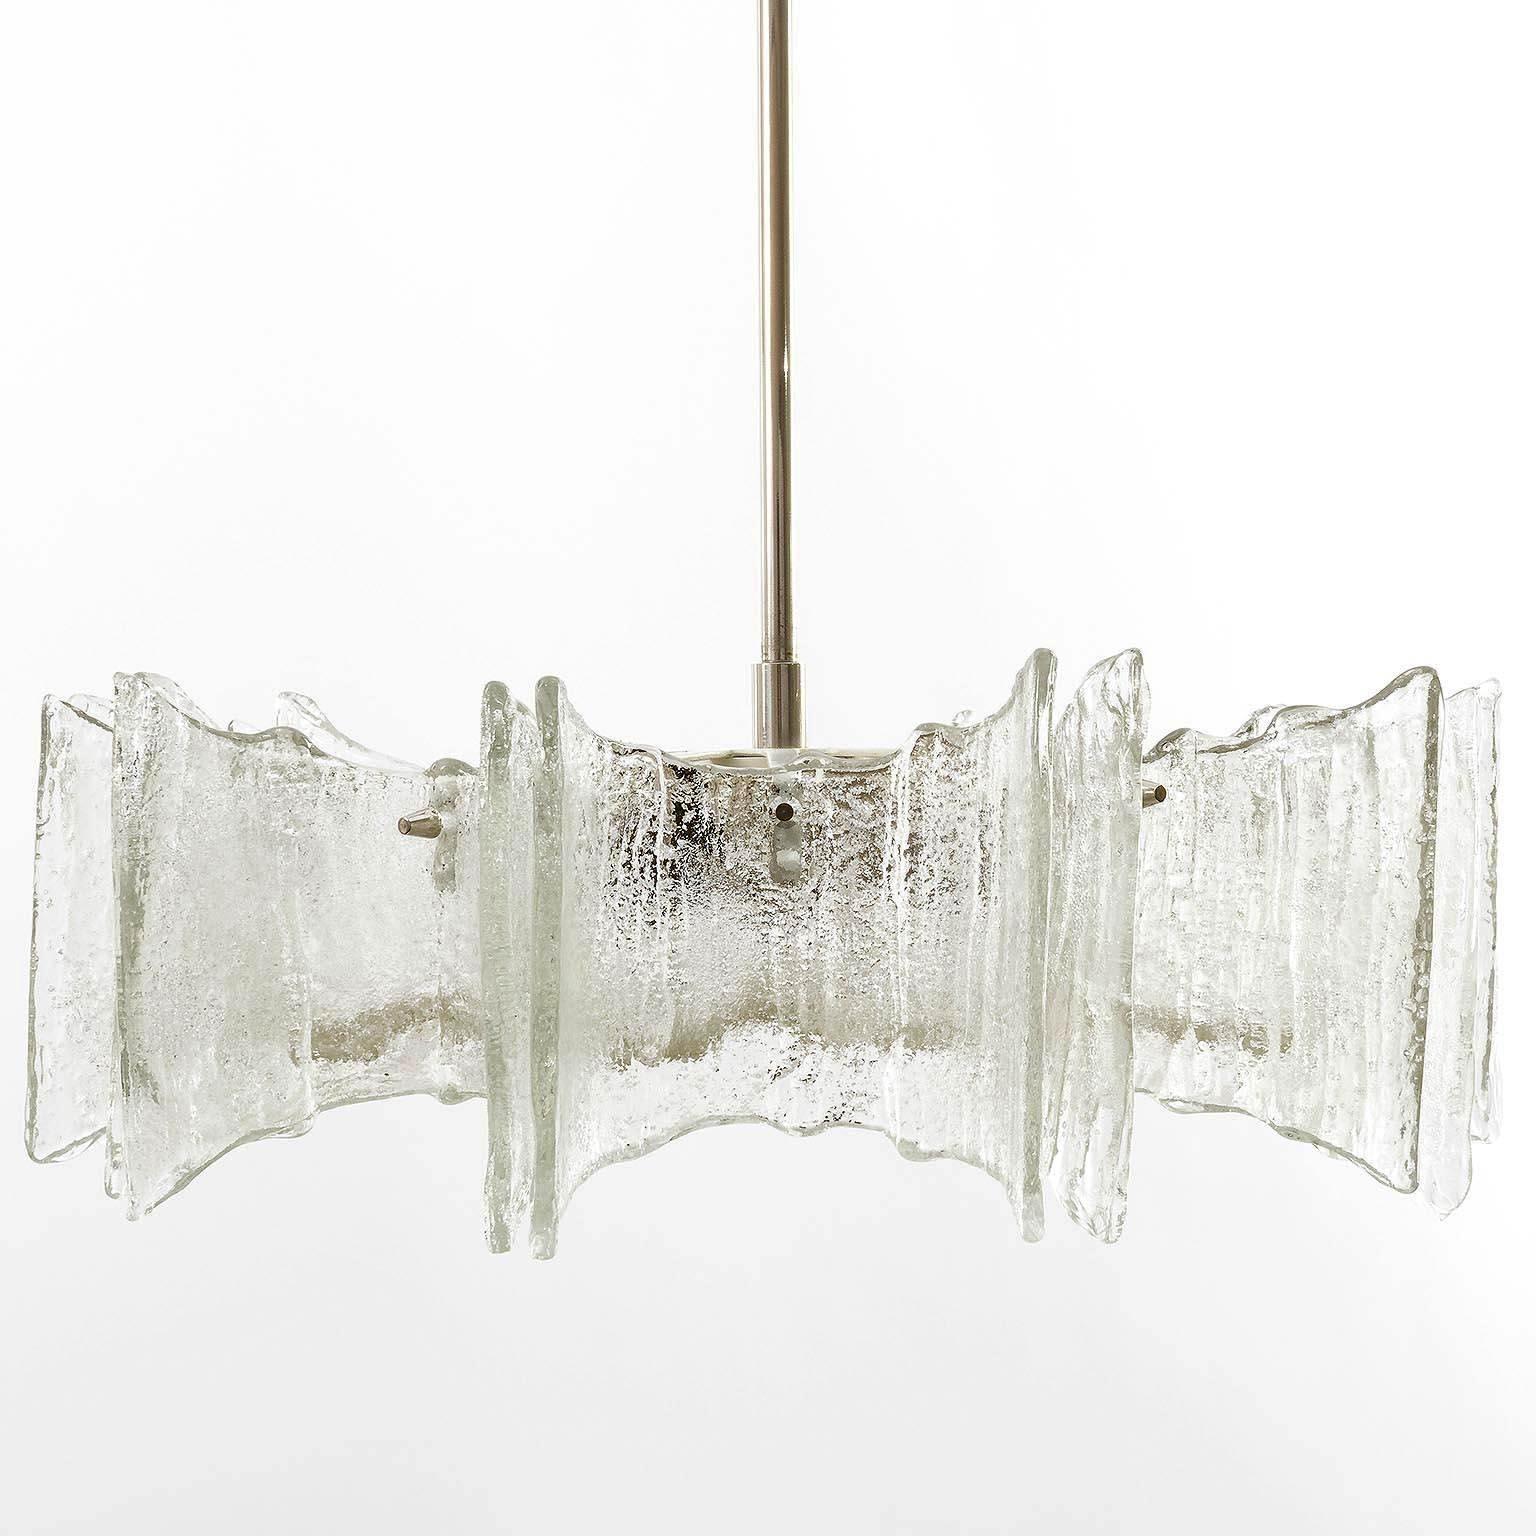 A star-shaped ceiling light by Kalmar manufactured in Austria in midcentury, circa 1970 (late 1960s or early 1970s). 
The lamp is made of frosted ice glass pieces mounted on a white lacquered frame and a nickel-plated brass stem and canopy.
It is